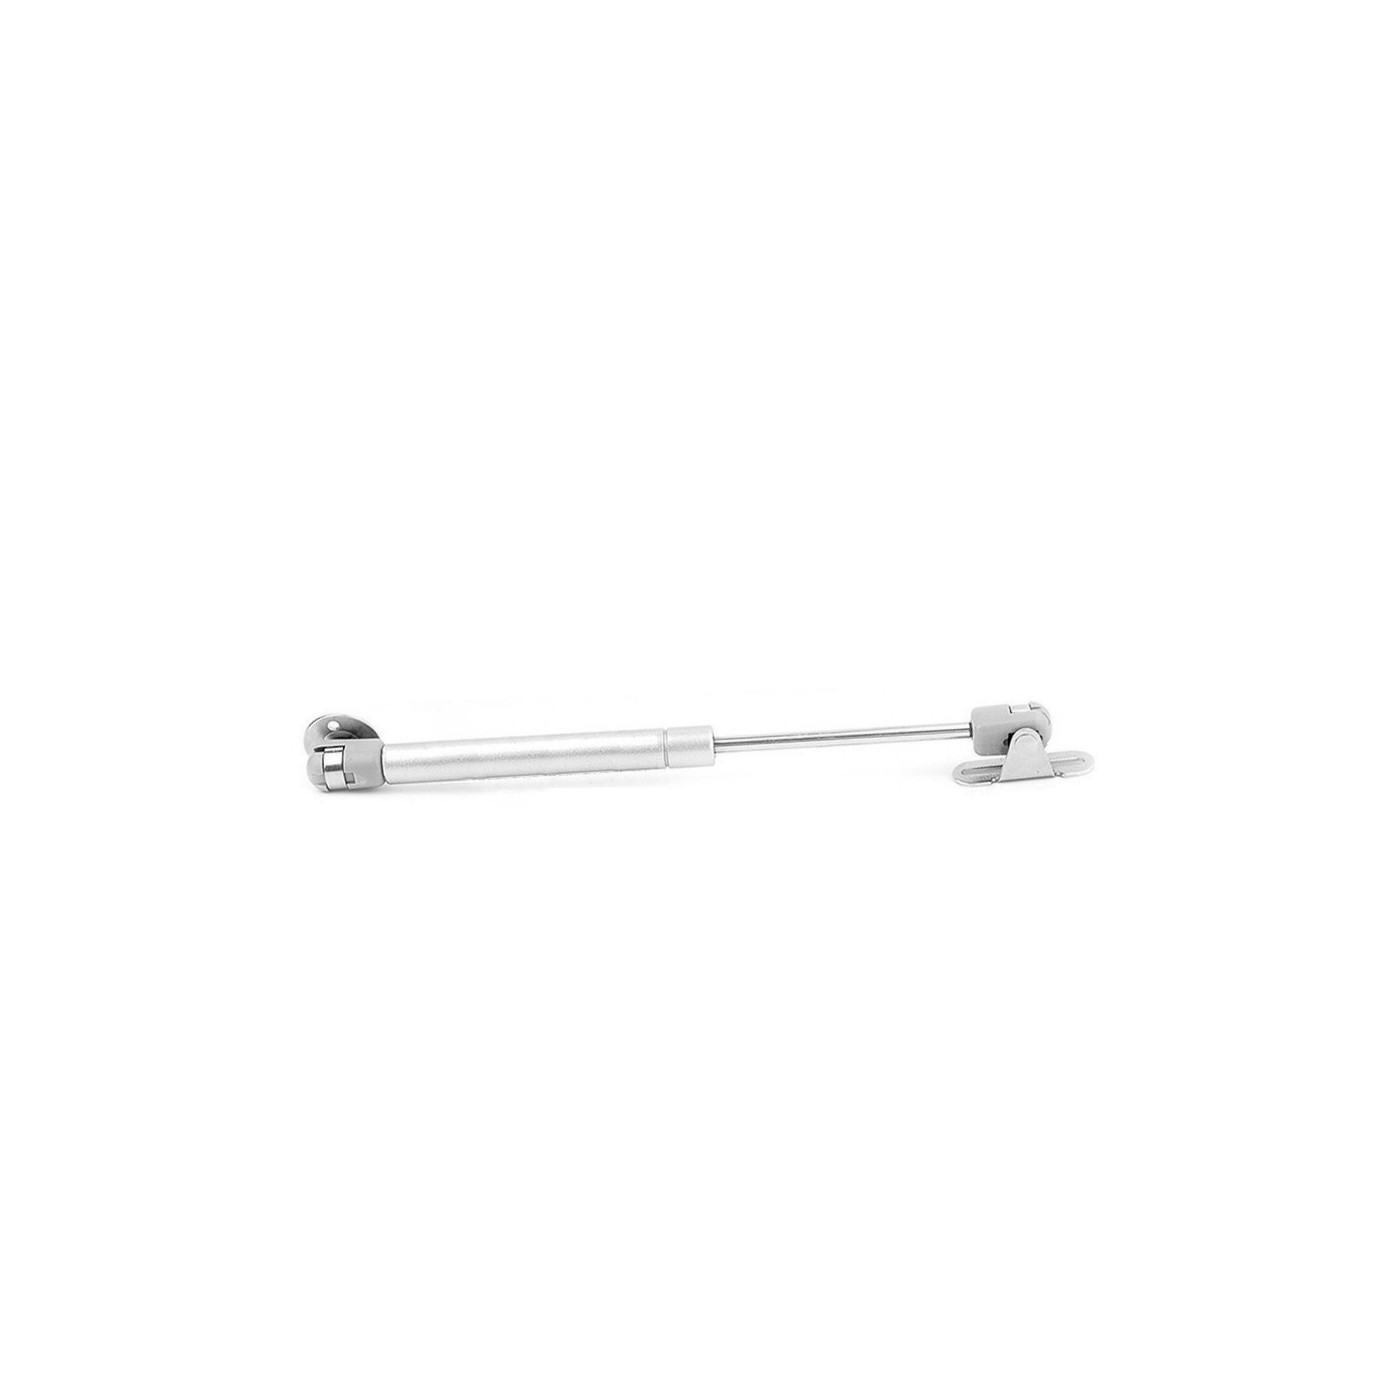 Universal gas spring with brackets (150N/15kg, 244 mm, silver)